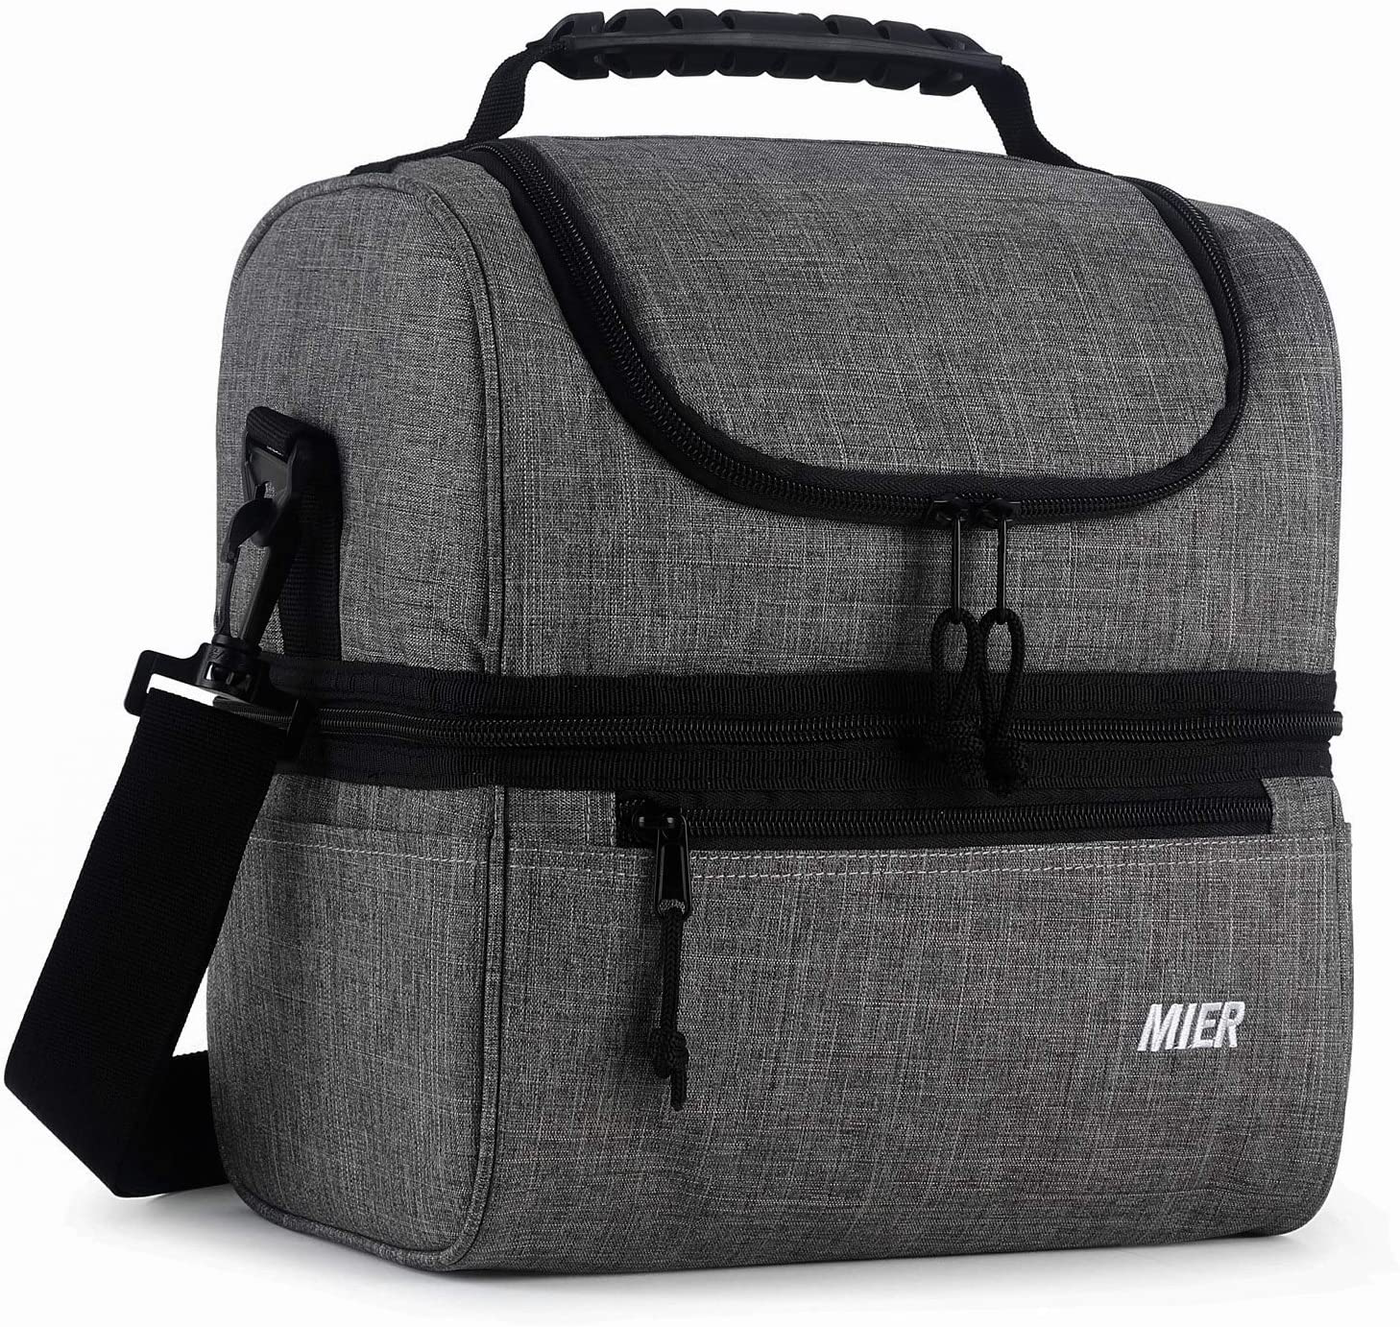 MIER Adult Lunch Box Insulated Lunch Bag Large Cooler Tote Bag for Men, Women, Double Deck Cooler (Grey, Large)